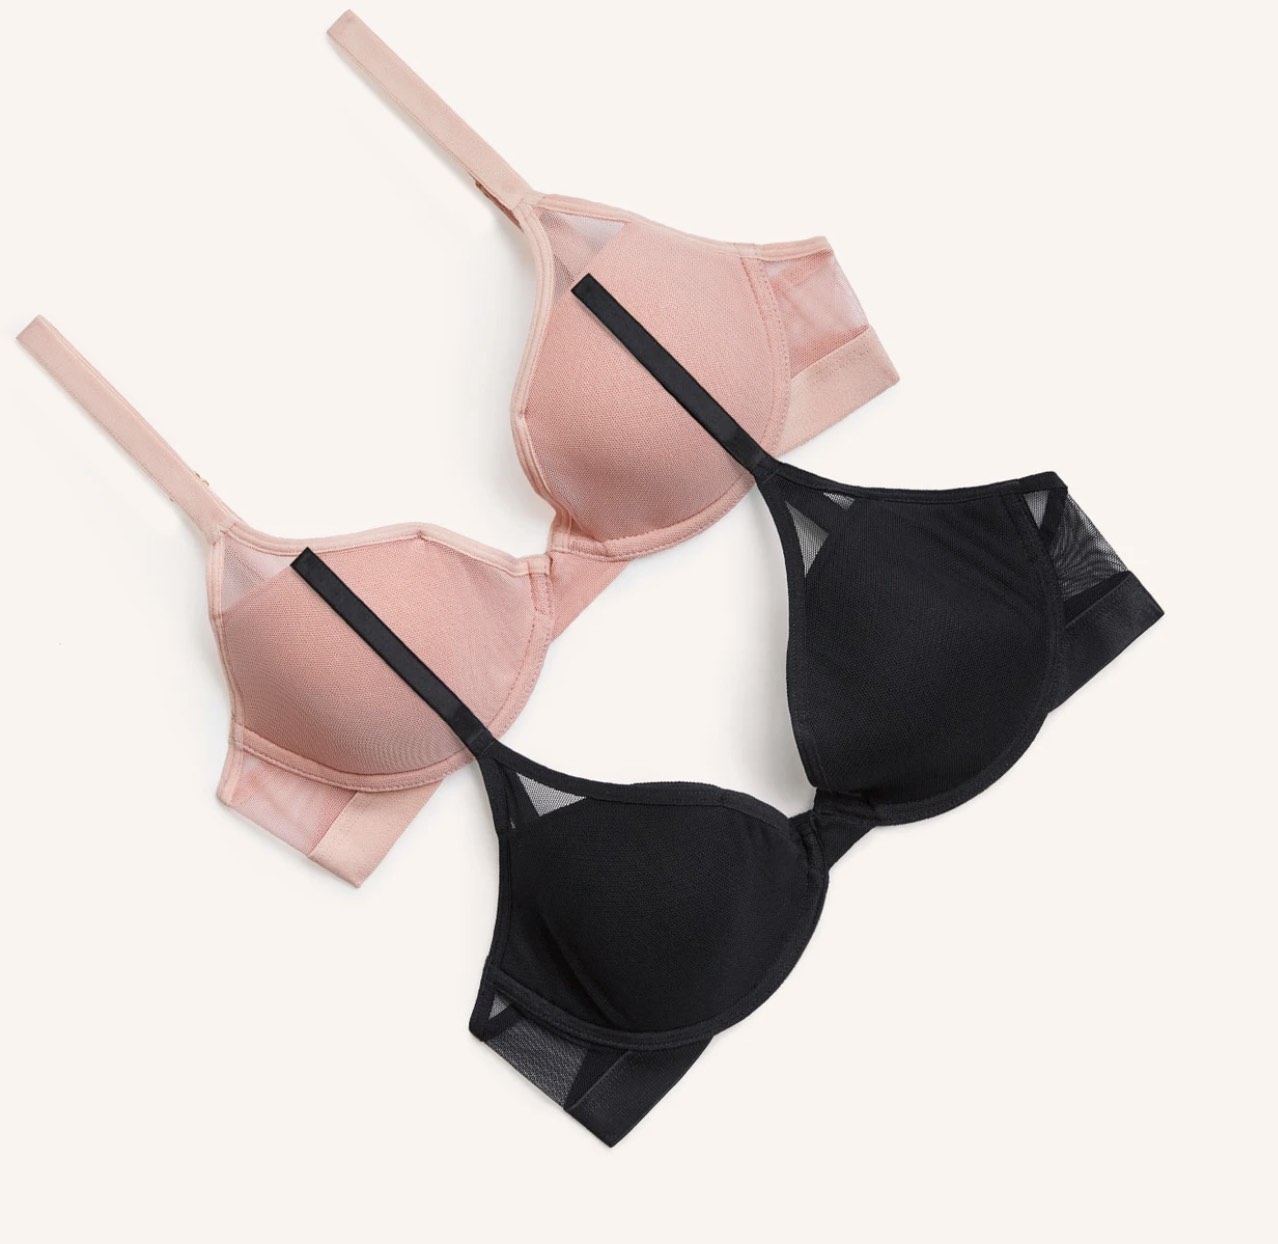 The Best Lingerie Brands That Offer Stylish and Oh-So-Comfortable